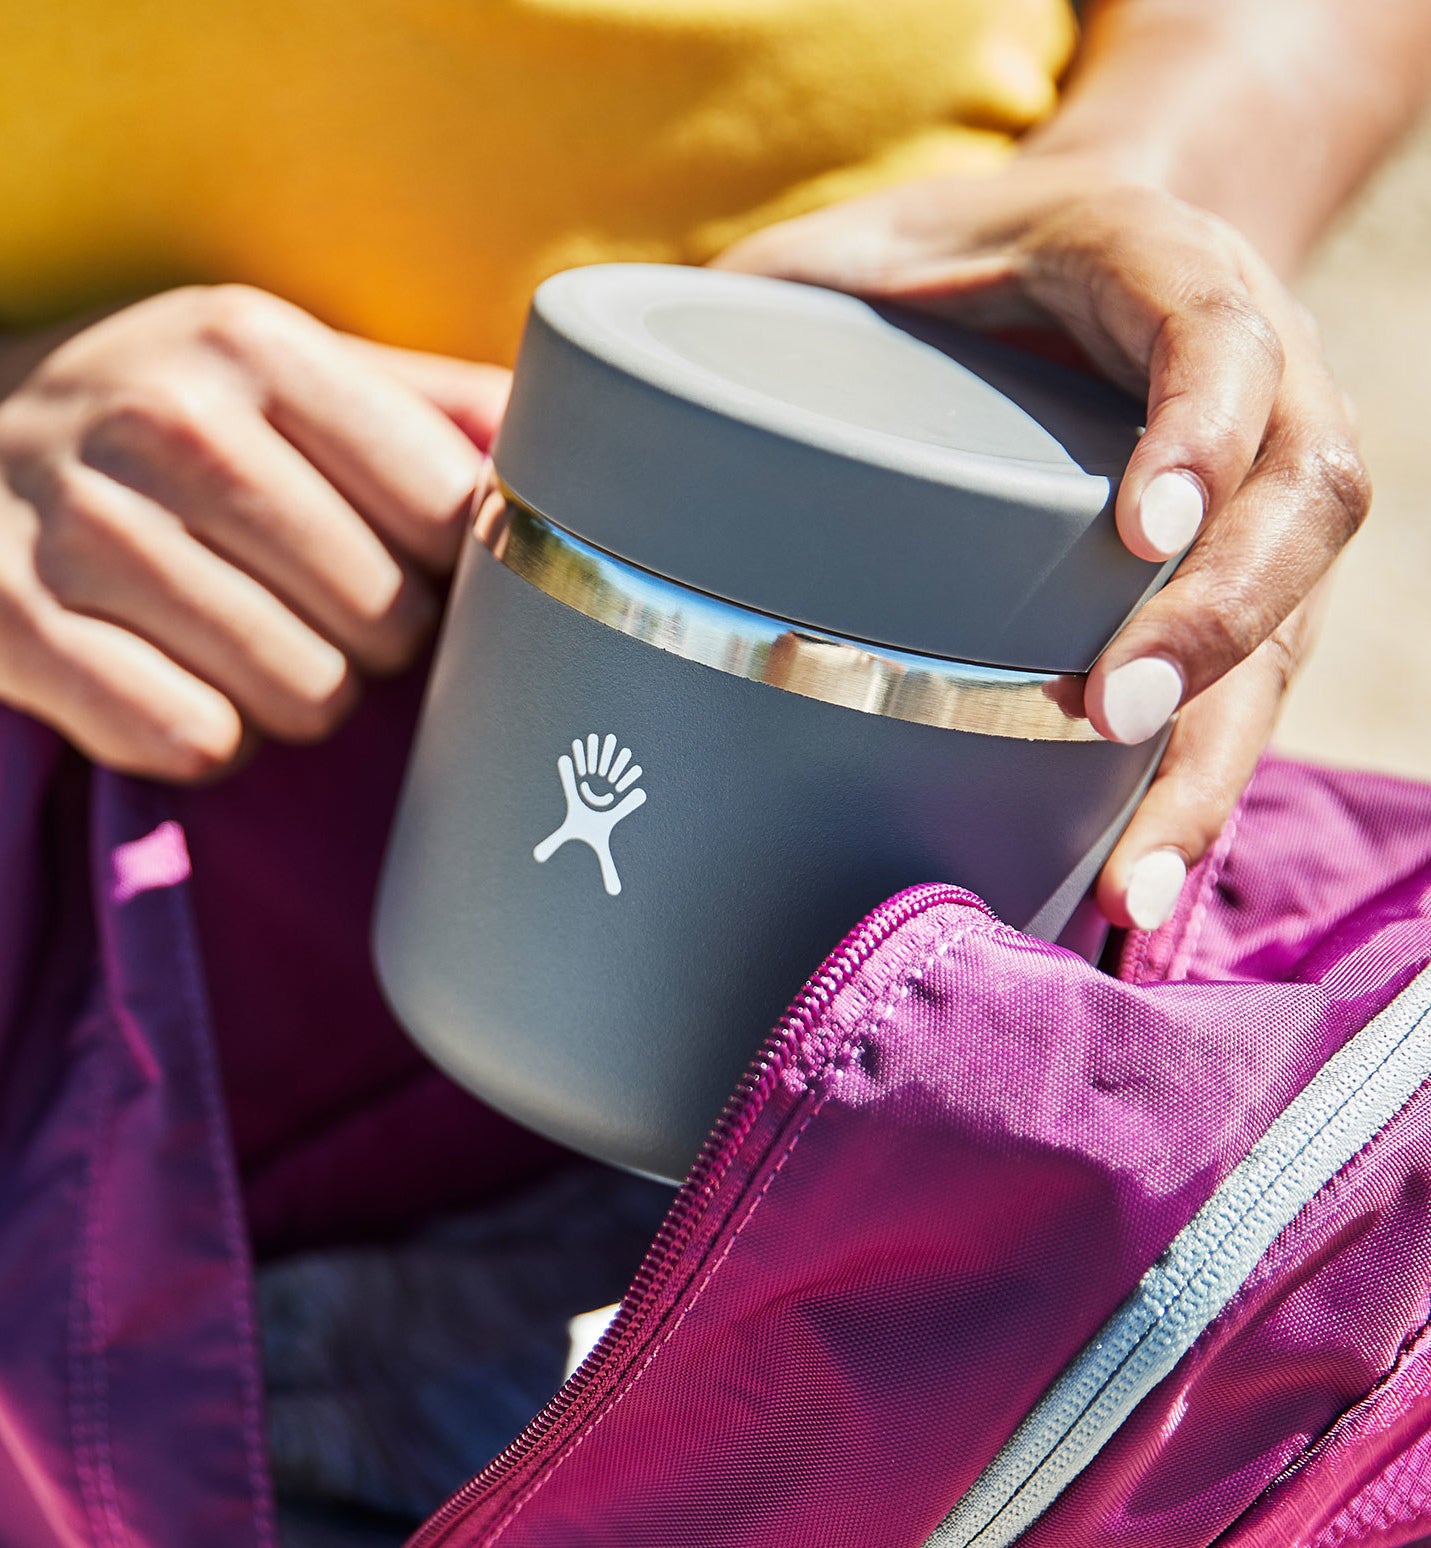 model putting grey stainless steel and screw-top food jar into a backpack